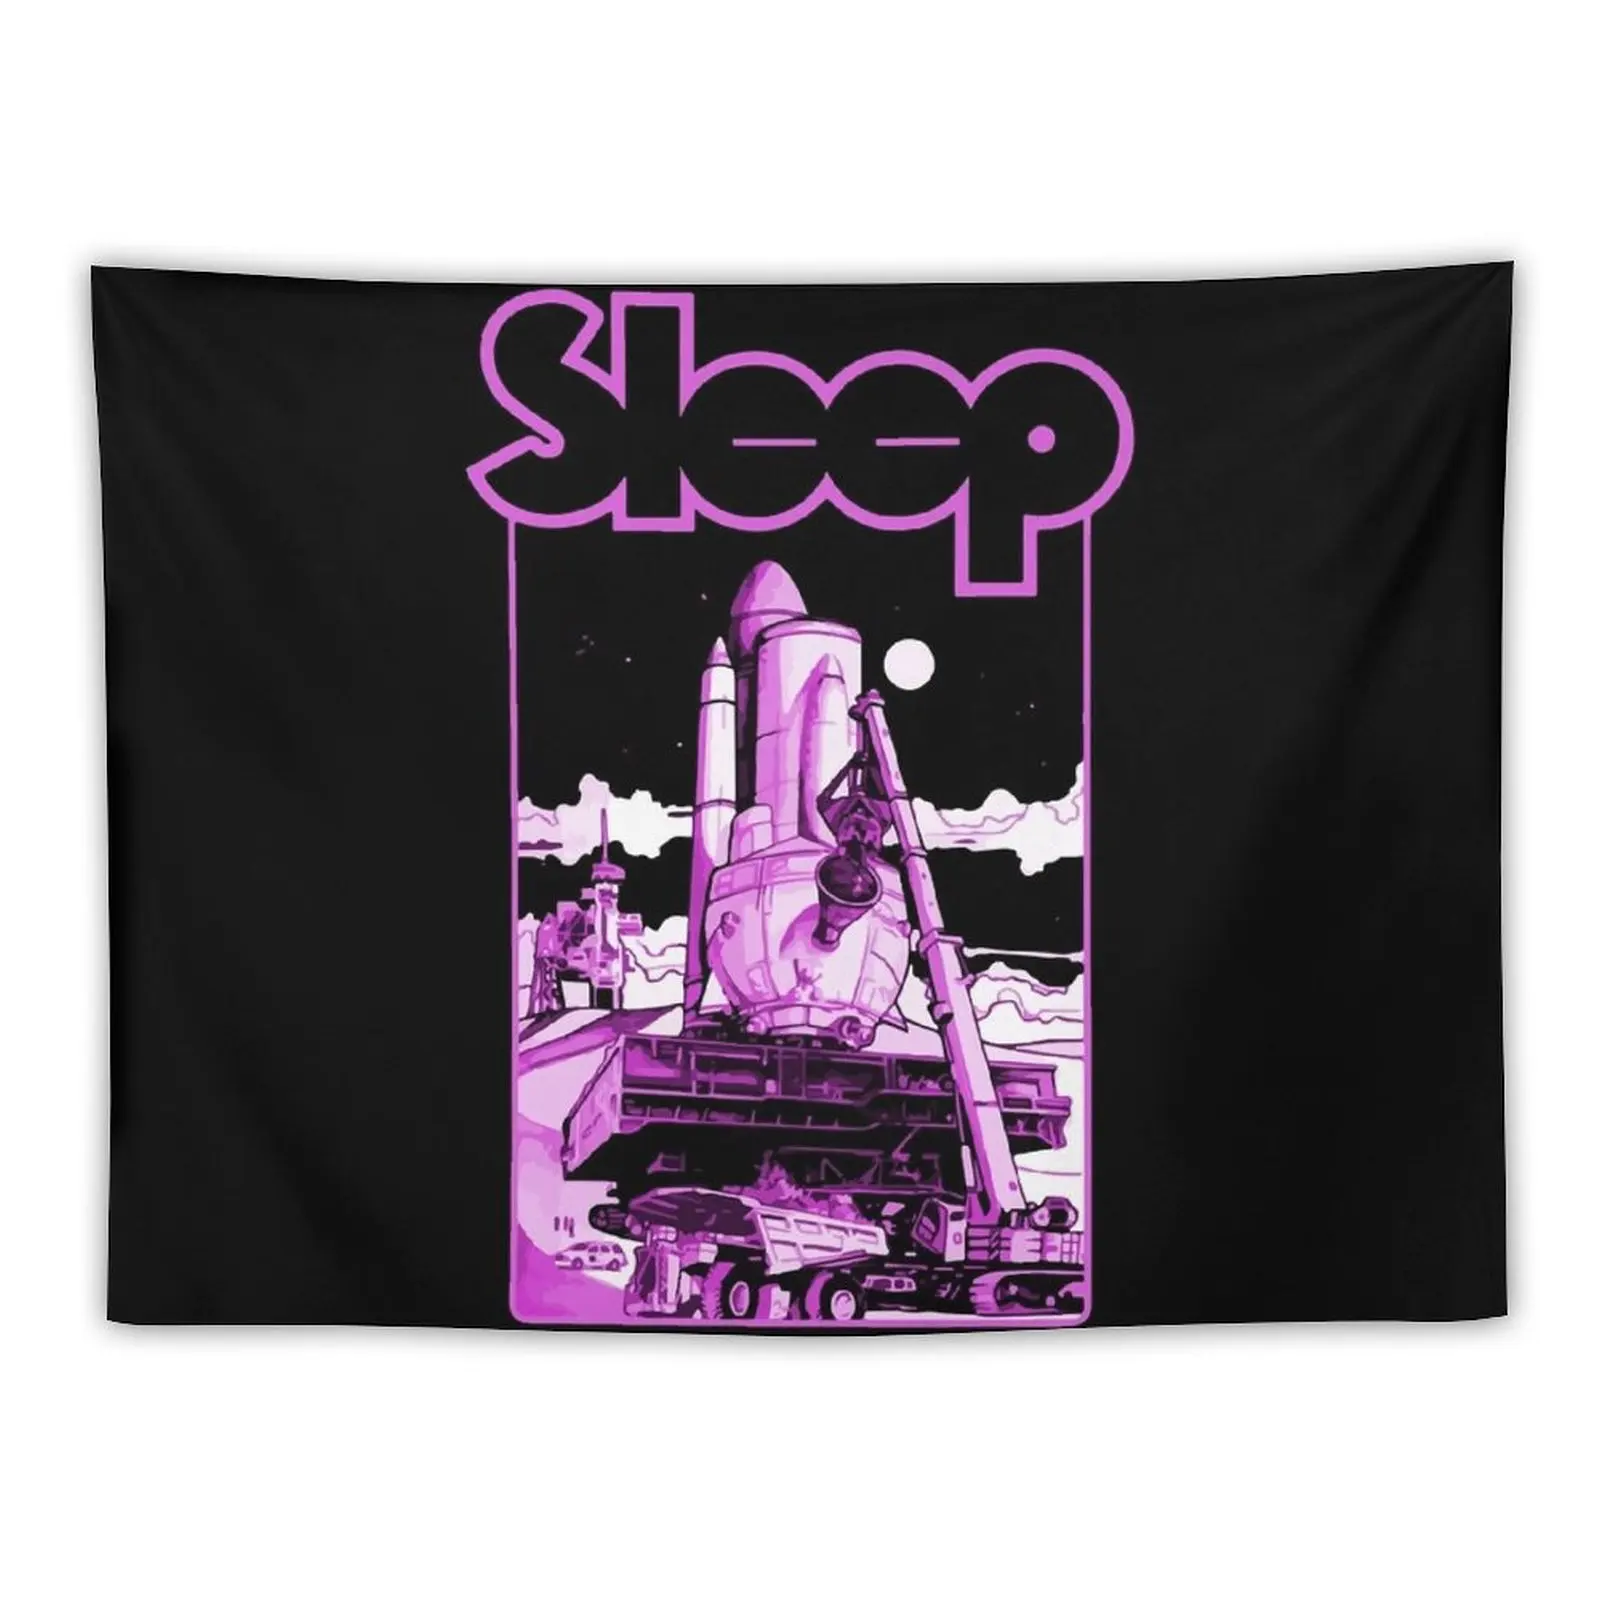 

Stoner Metal Sleep Band T-Shirt Tapestry Anime Decor Room Decor For Girls Decoration For Rooms Tapestries Wall Hanging